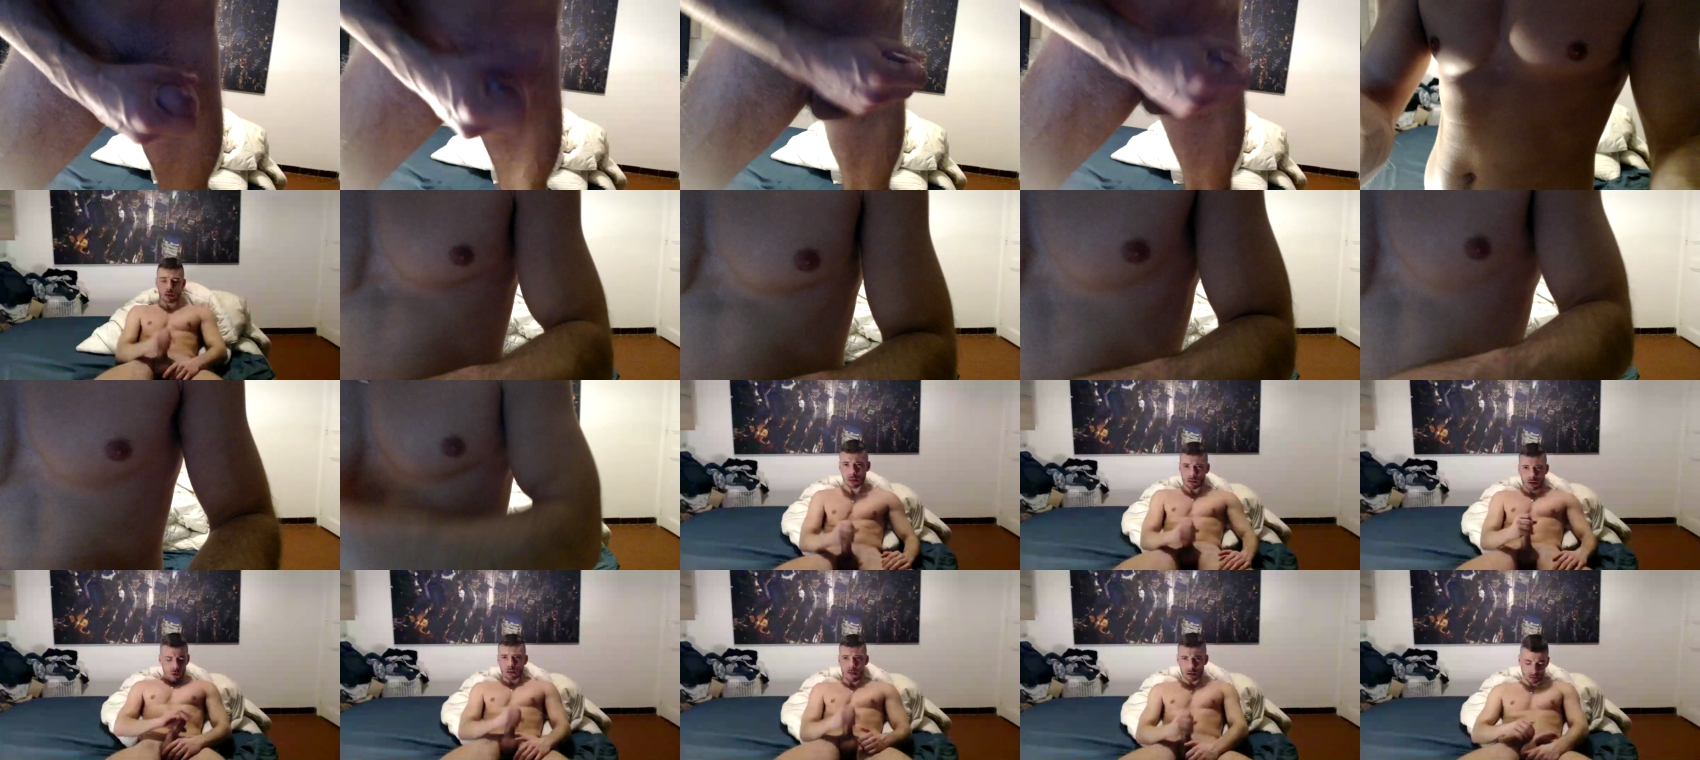 AlphaFrenchFit  13-01-2023 Recorded Video sex